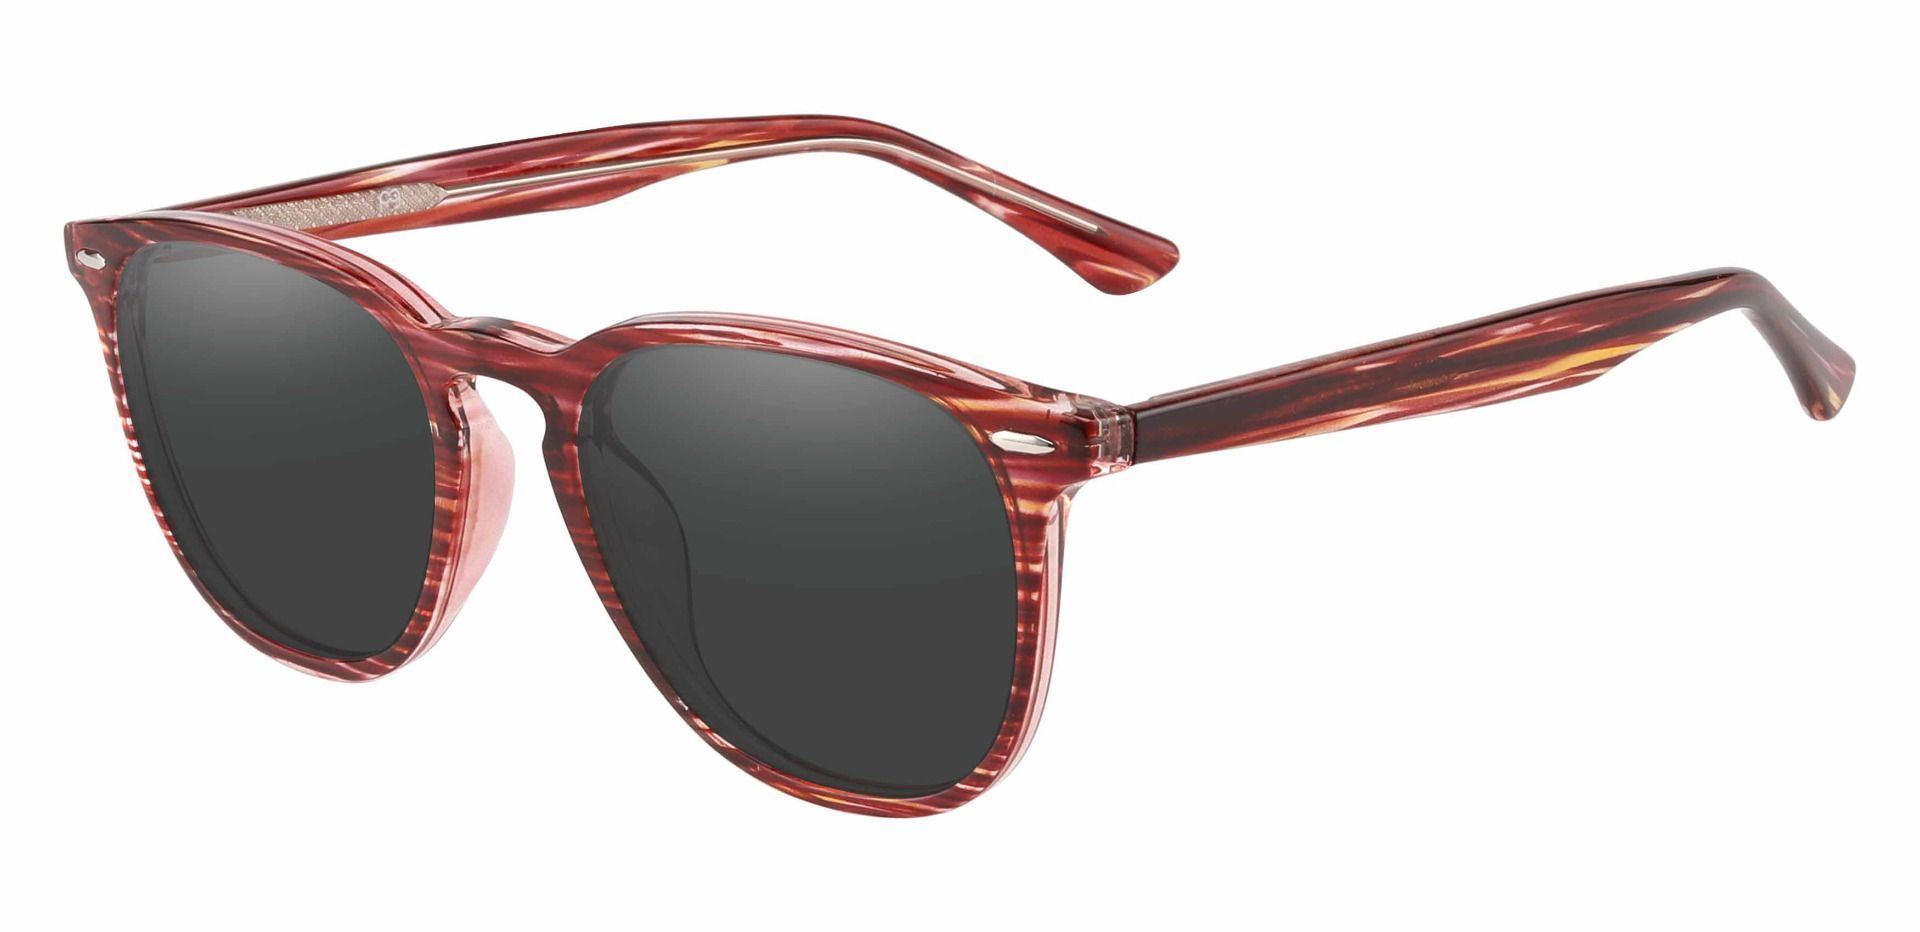 Sycamore Oval Progressive Sunglasses - Red Frame With Gray Lenses